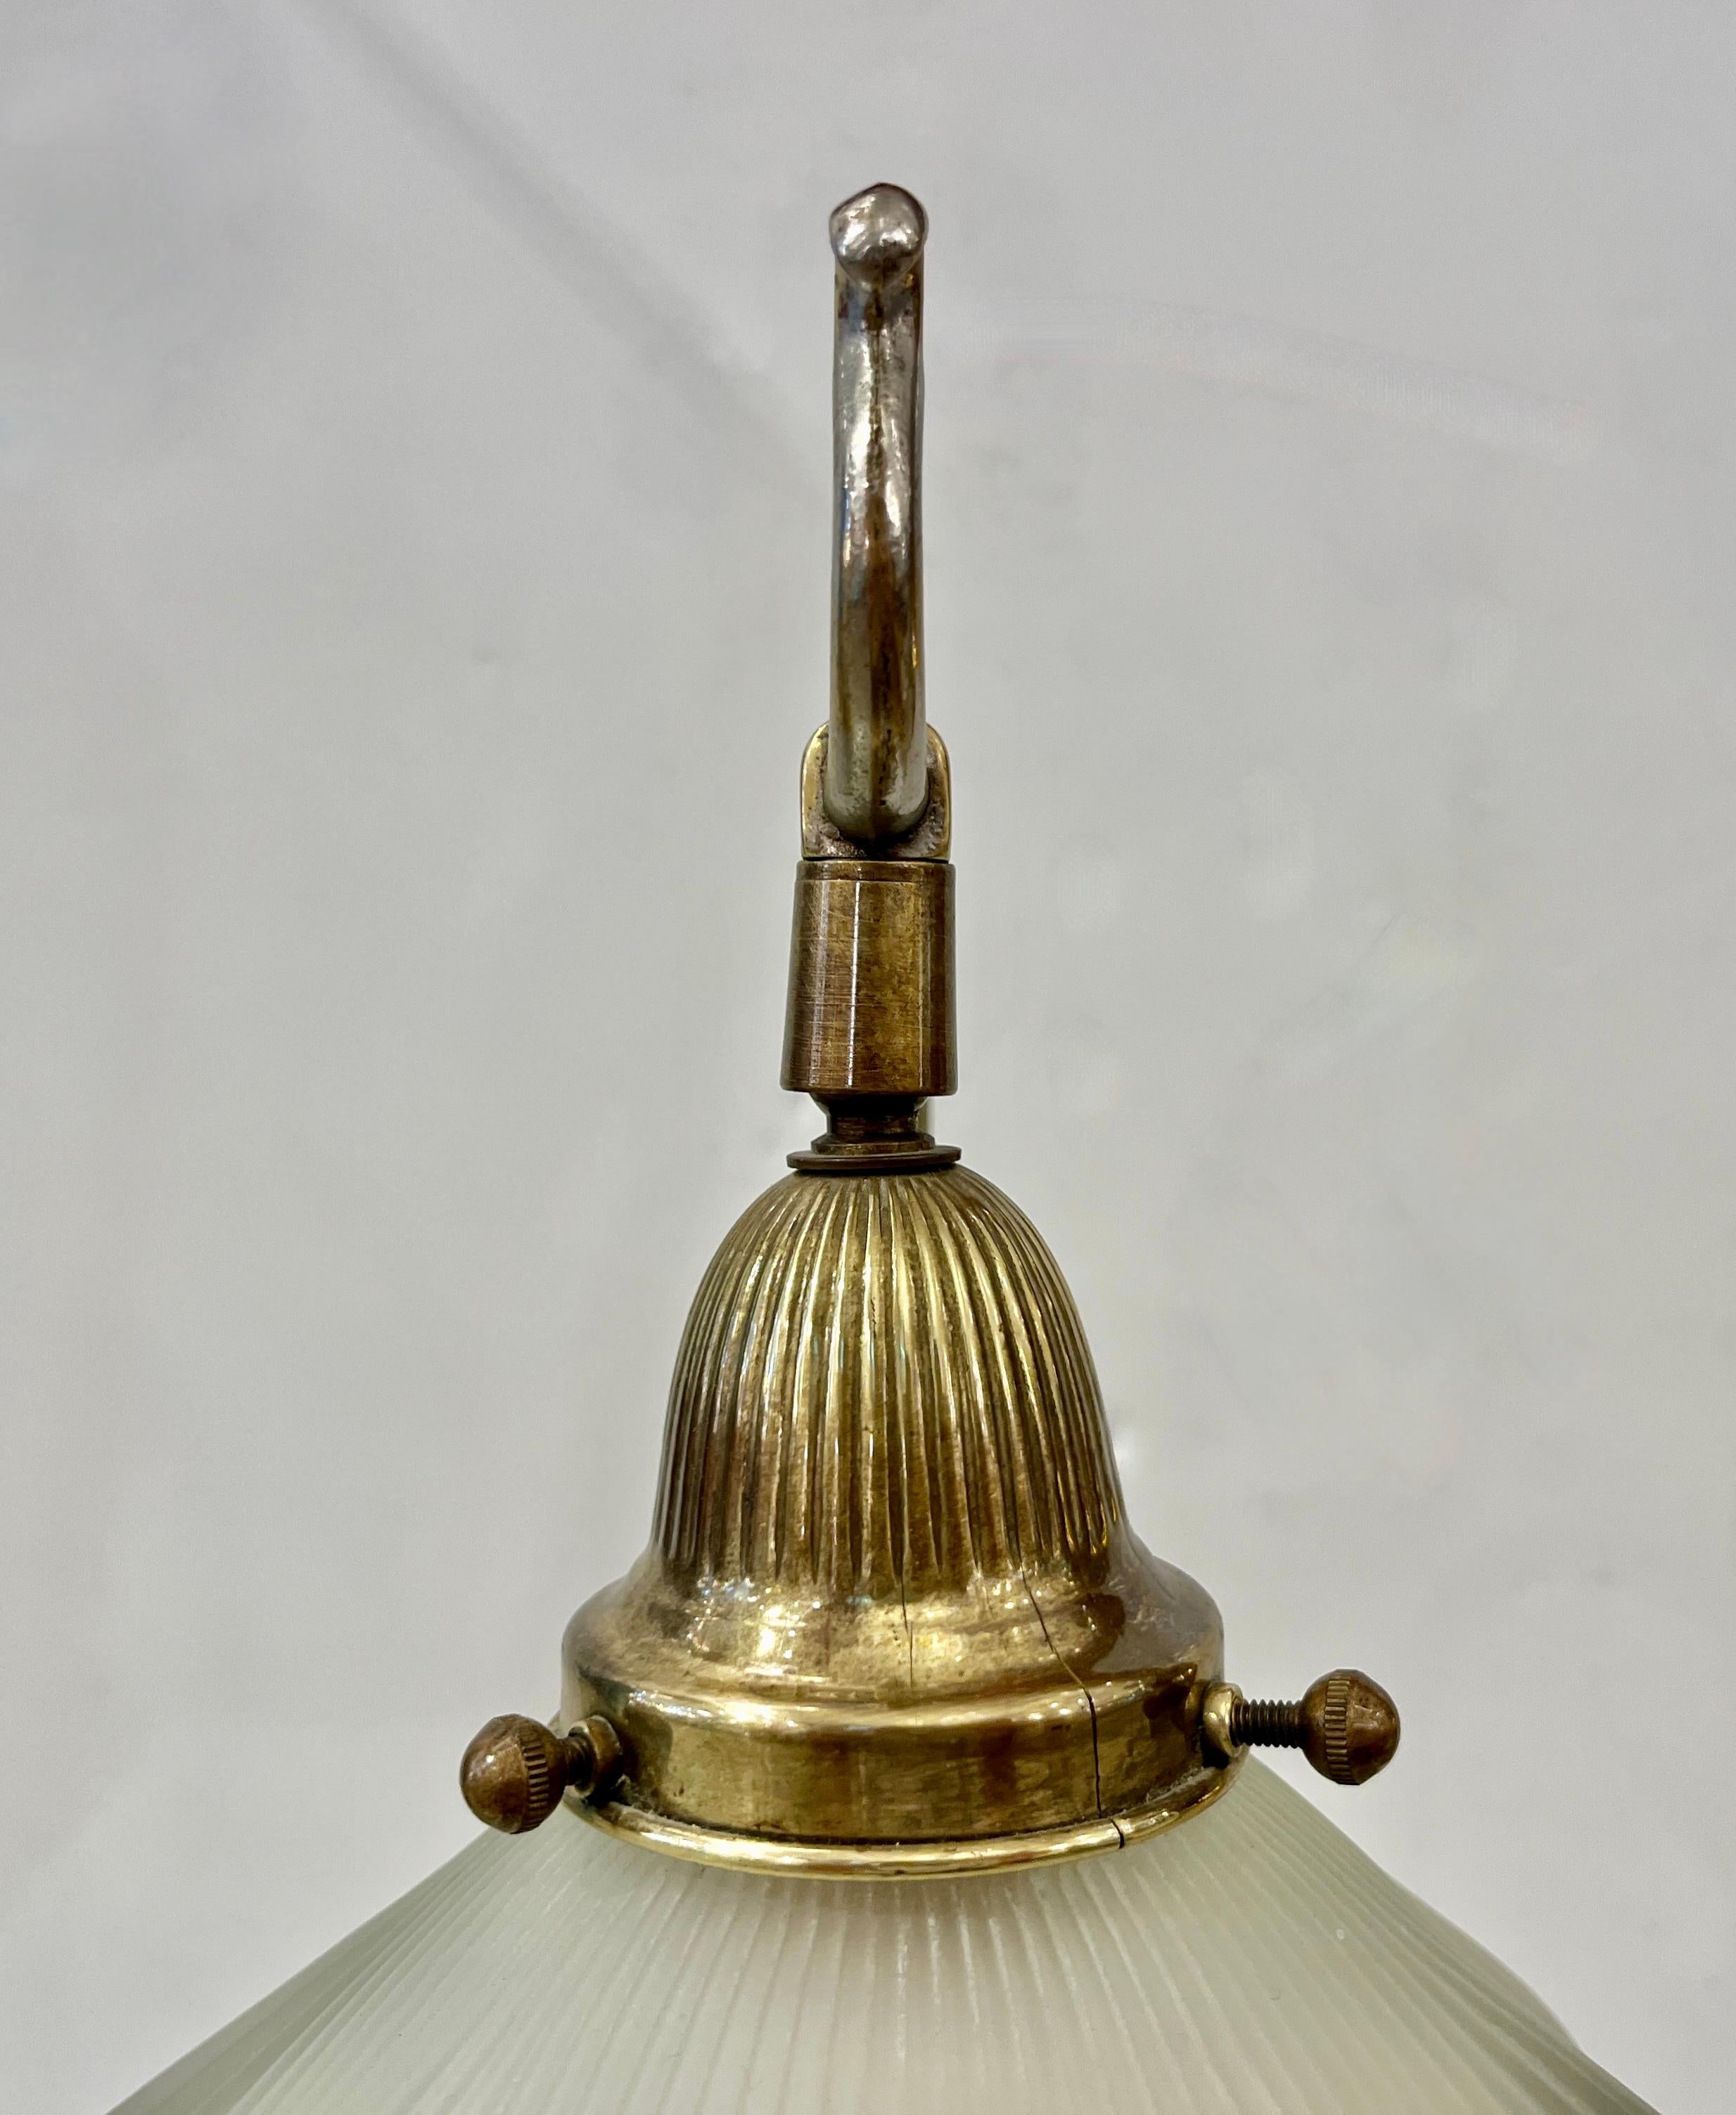 1950s American Art Deco Style Brass Table/Desk Lamp with Satin White Glass Shade For Sale 3